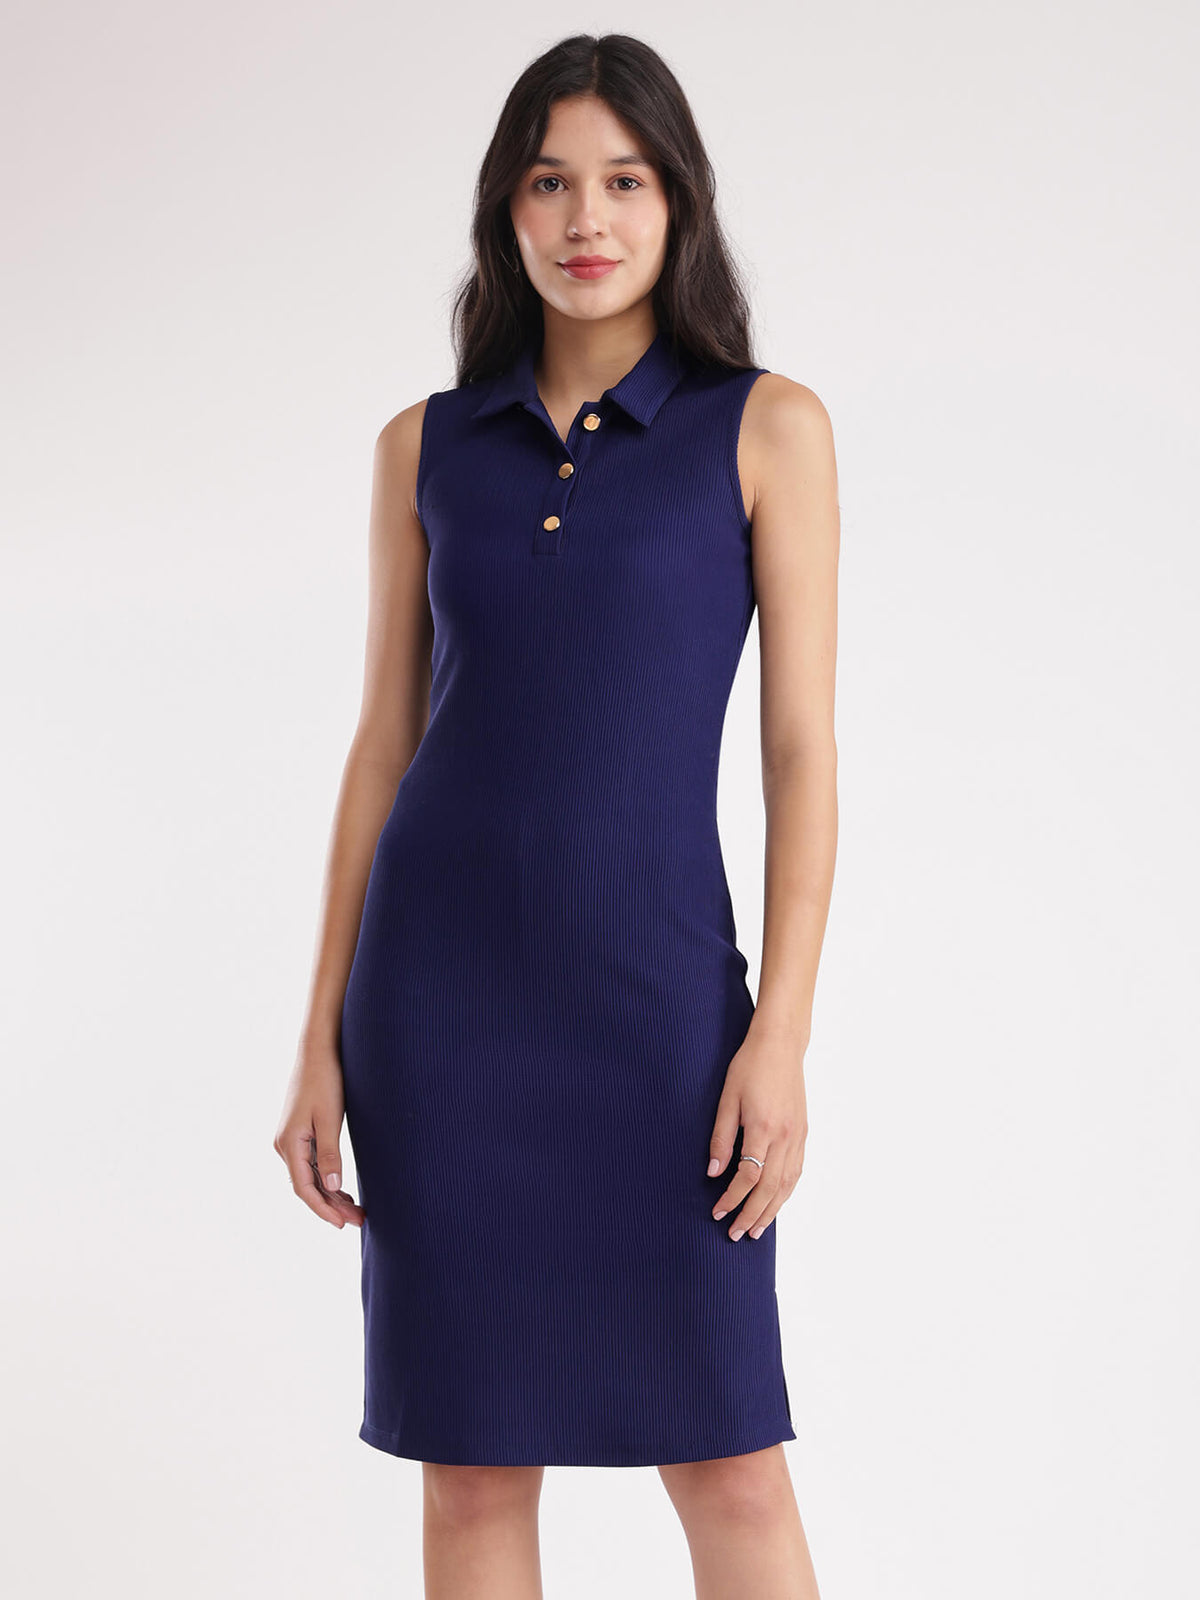 Bodycon Knitted Dress - Navy Blue